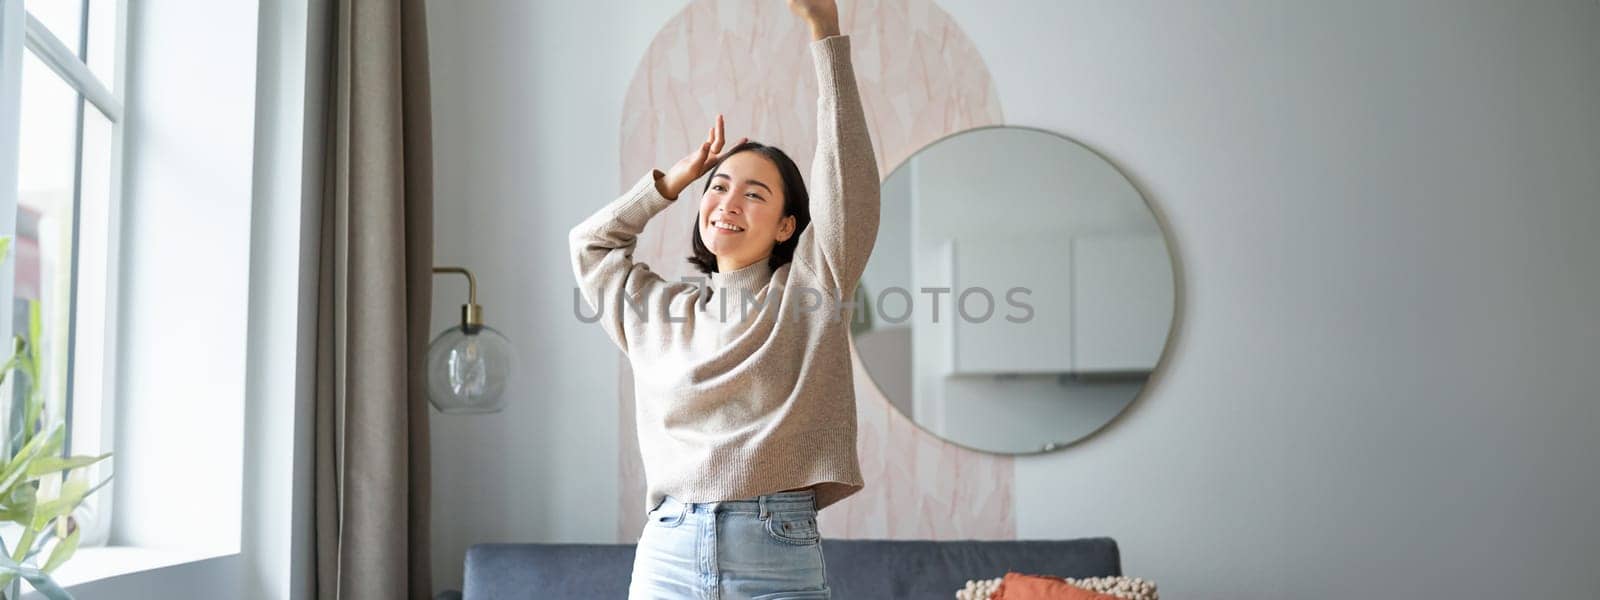 Women and wellbeing. Beautiful young asian woman dancing, feeling carefree and happy, raising her hands above head and smiling, enjoying her stay at home.